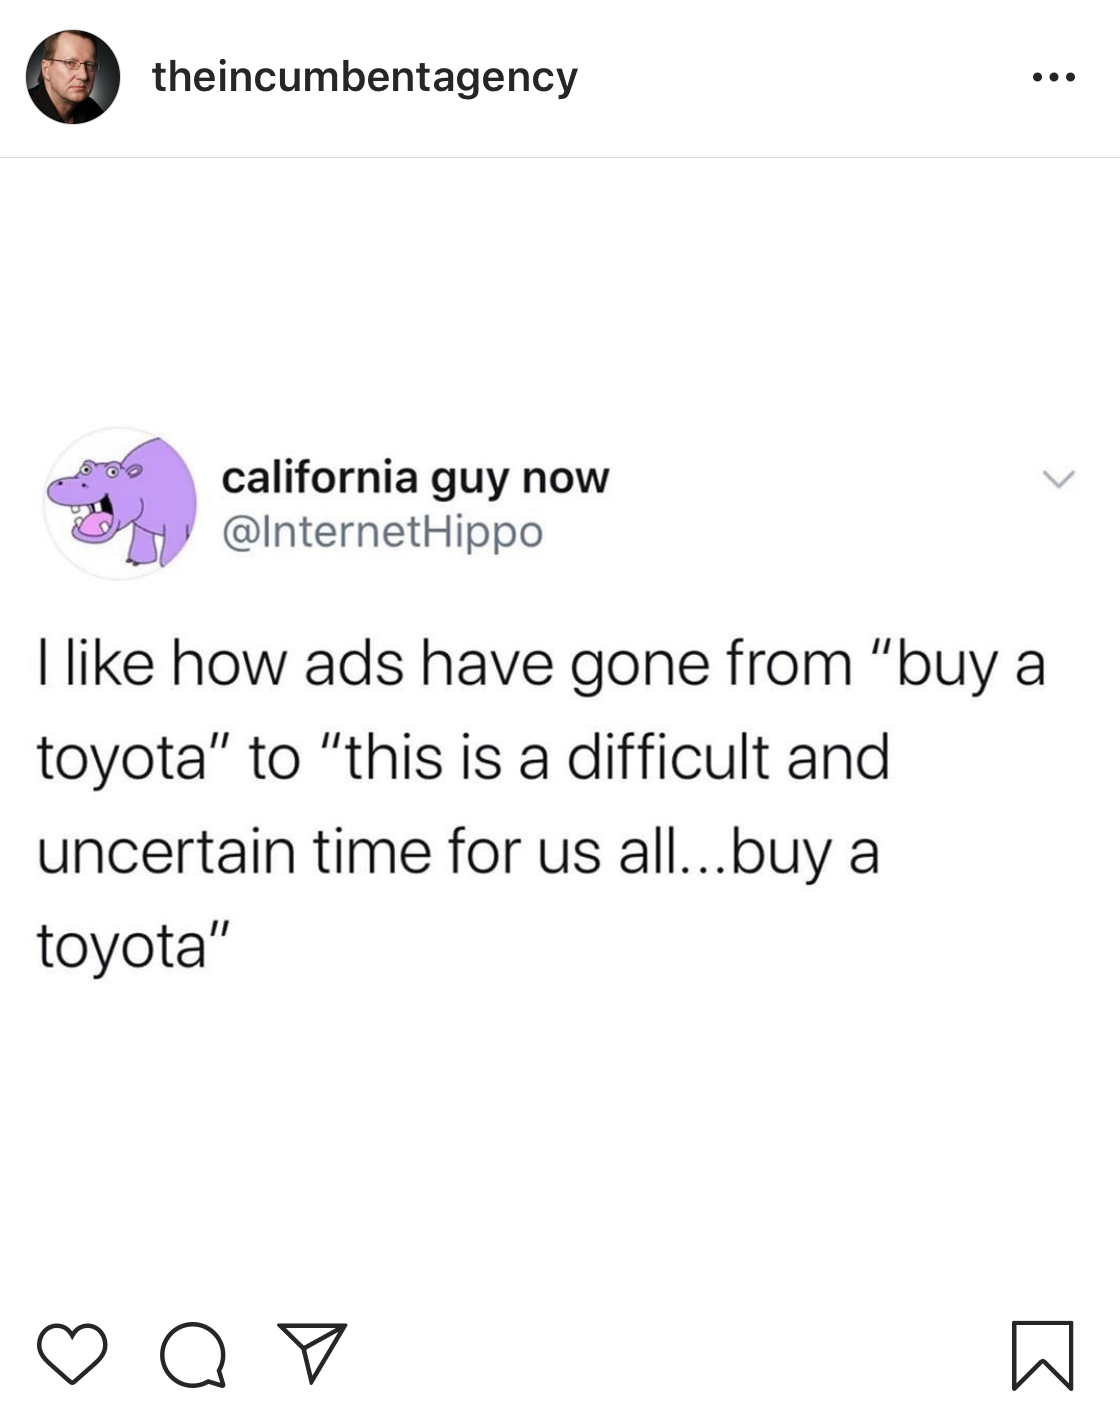 Customer empathy meme: I like how ads have gone from "buy a car" to "this is a difficult and uncertain time for us all... buy a car".